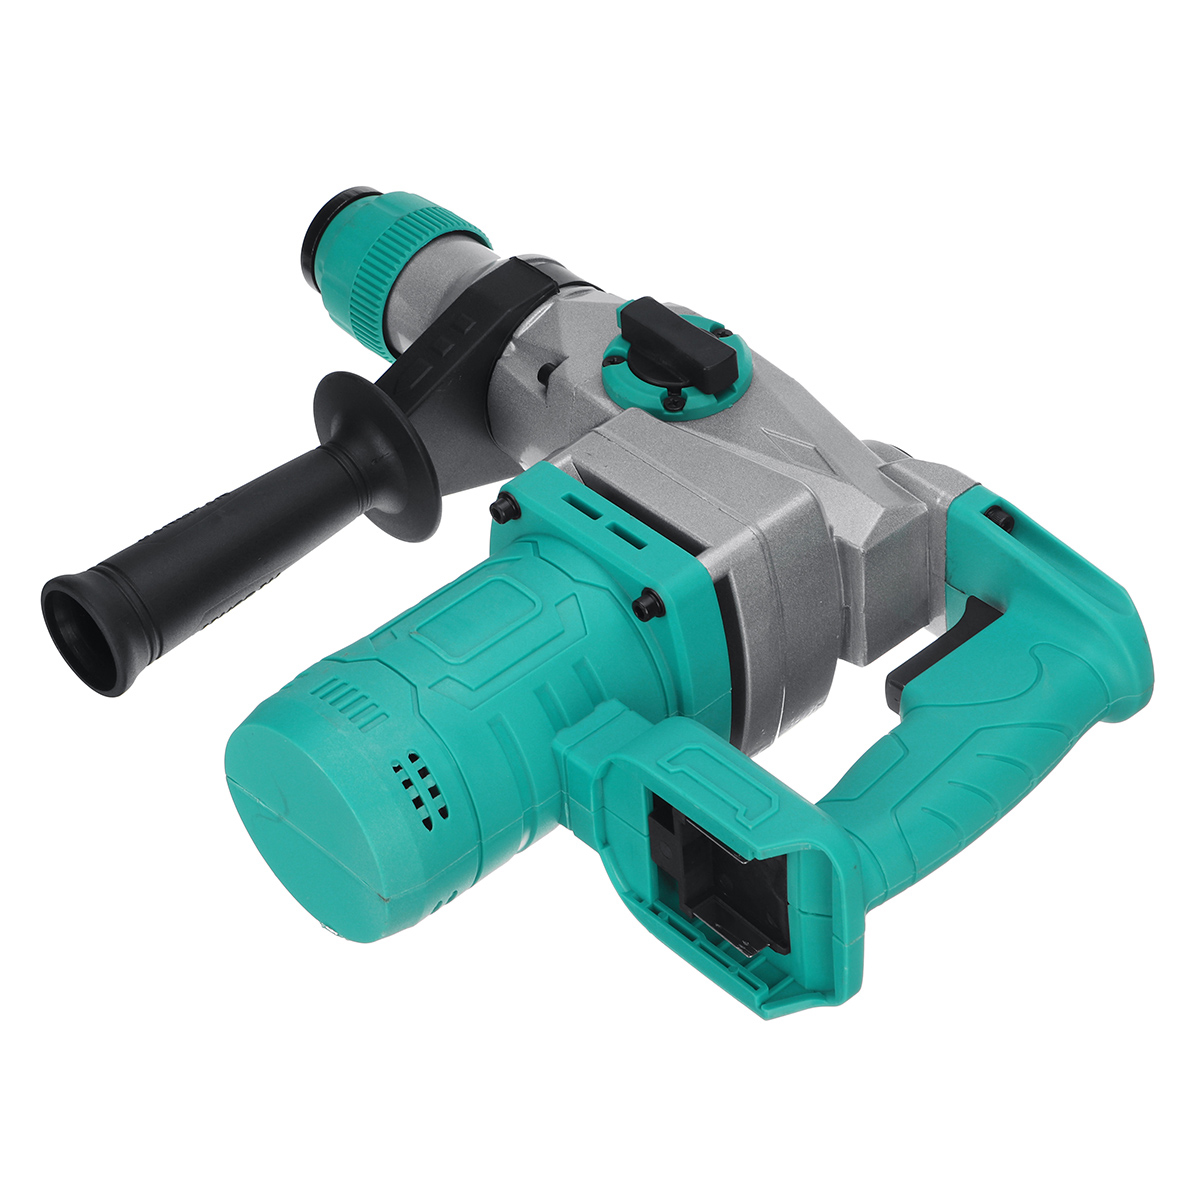 Brushless-Cordless-Electric-Hammer-Drill-Wood-Concrete-Wall-Drilling-Slotting-Tool-W-None-or-1pc-Bat-1878668-10